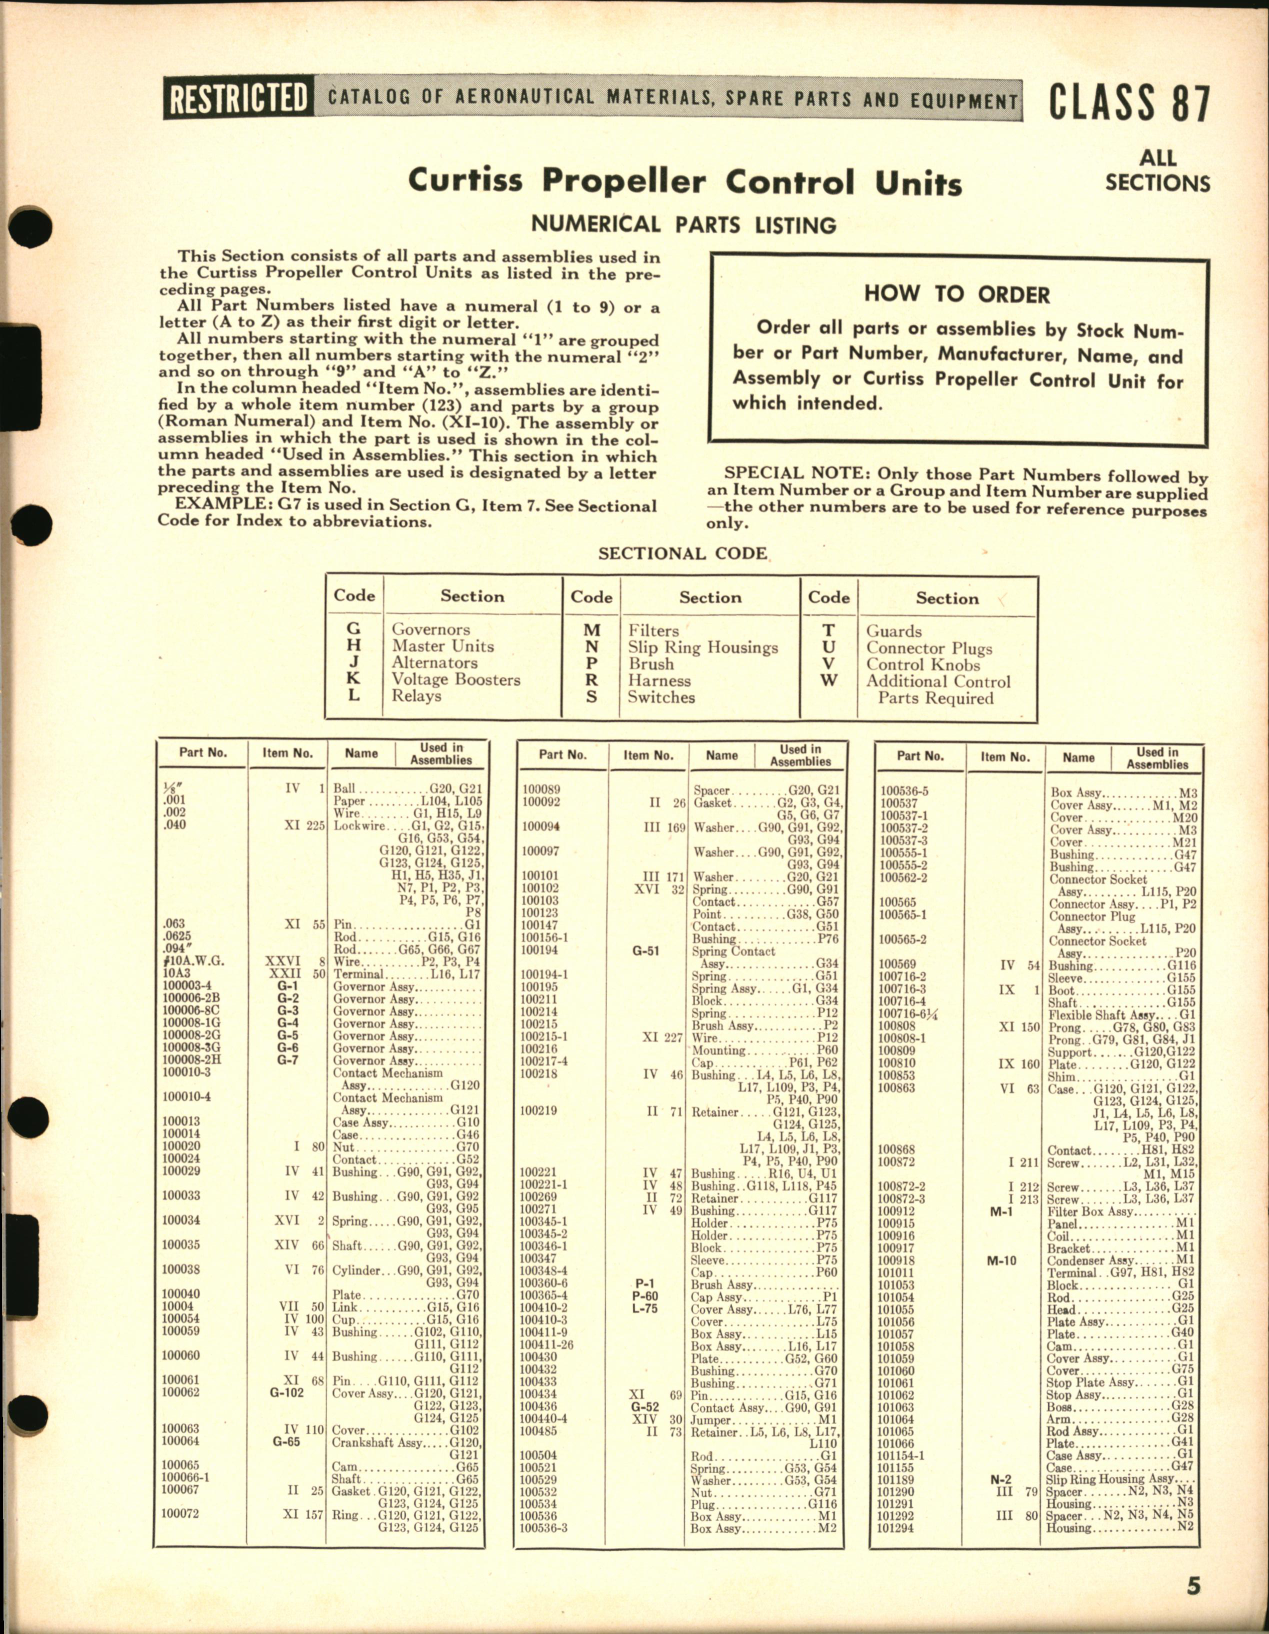 Sample page 5 from AirCorps Library document: Hamilton and Curtiss Propeller Controls Numerical Listings